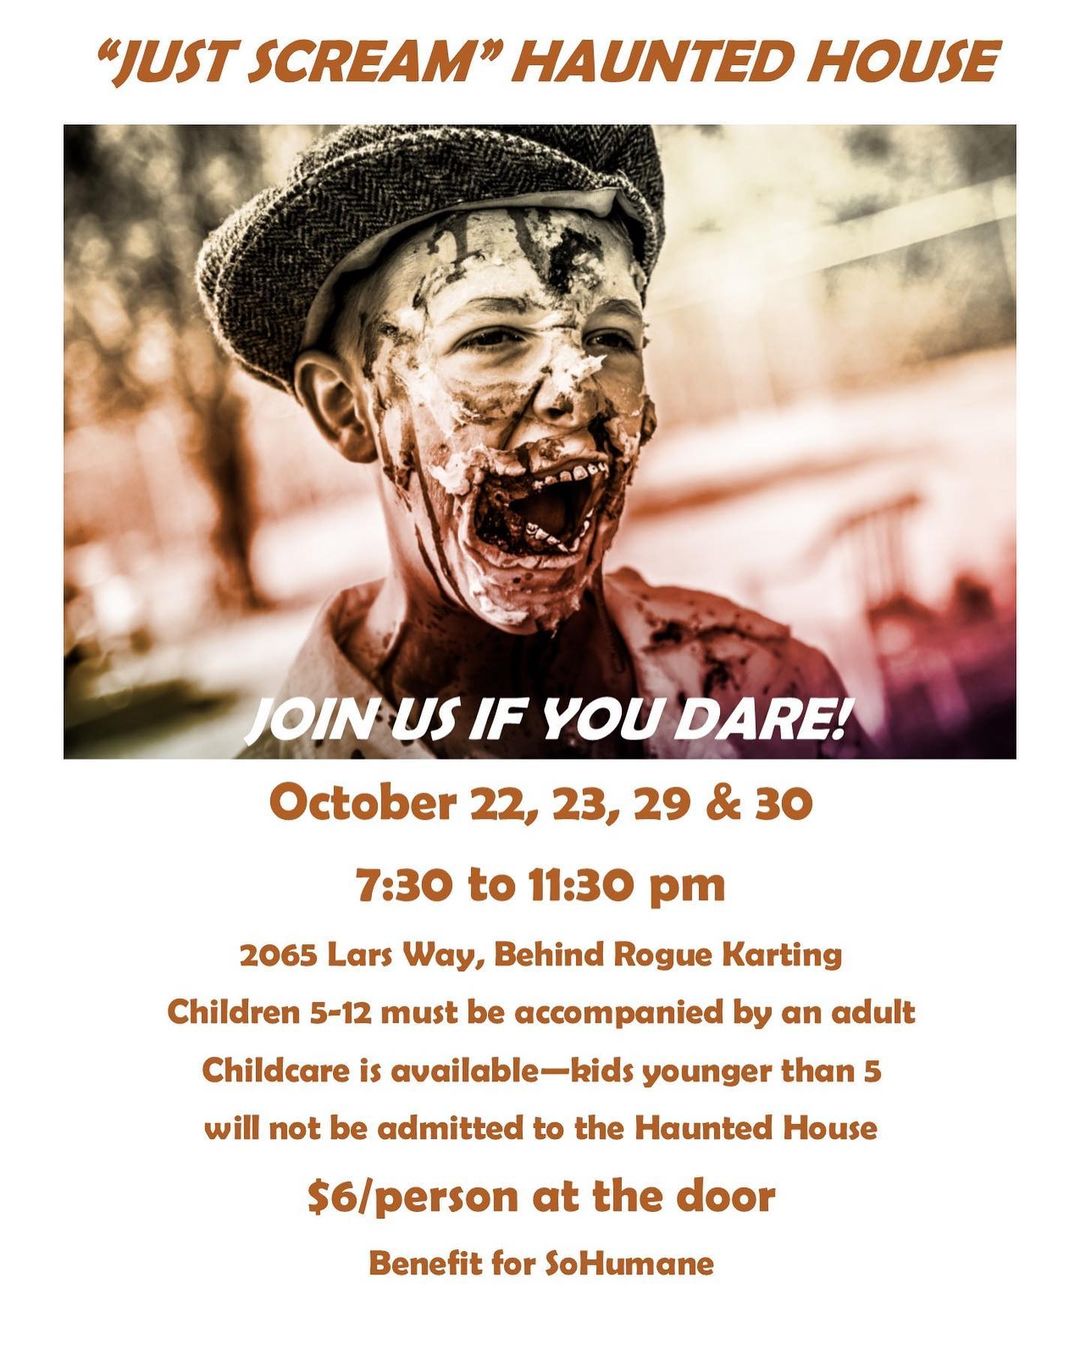 It’s Spooky Season!👻 
Join us, if you dare😈, the next 2 weekends for some spooktacular fun at our ‘Just Scream’ haunted house🧟‍♂️